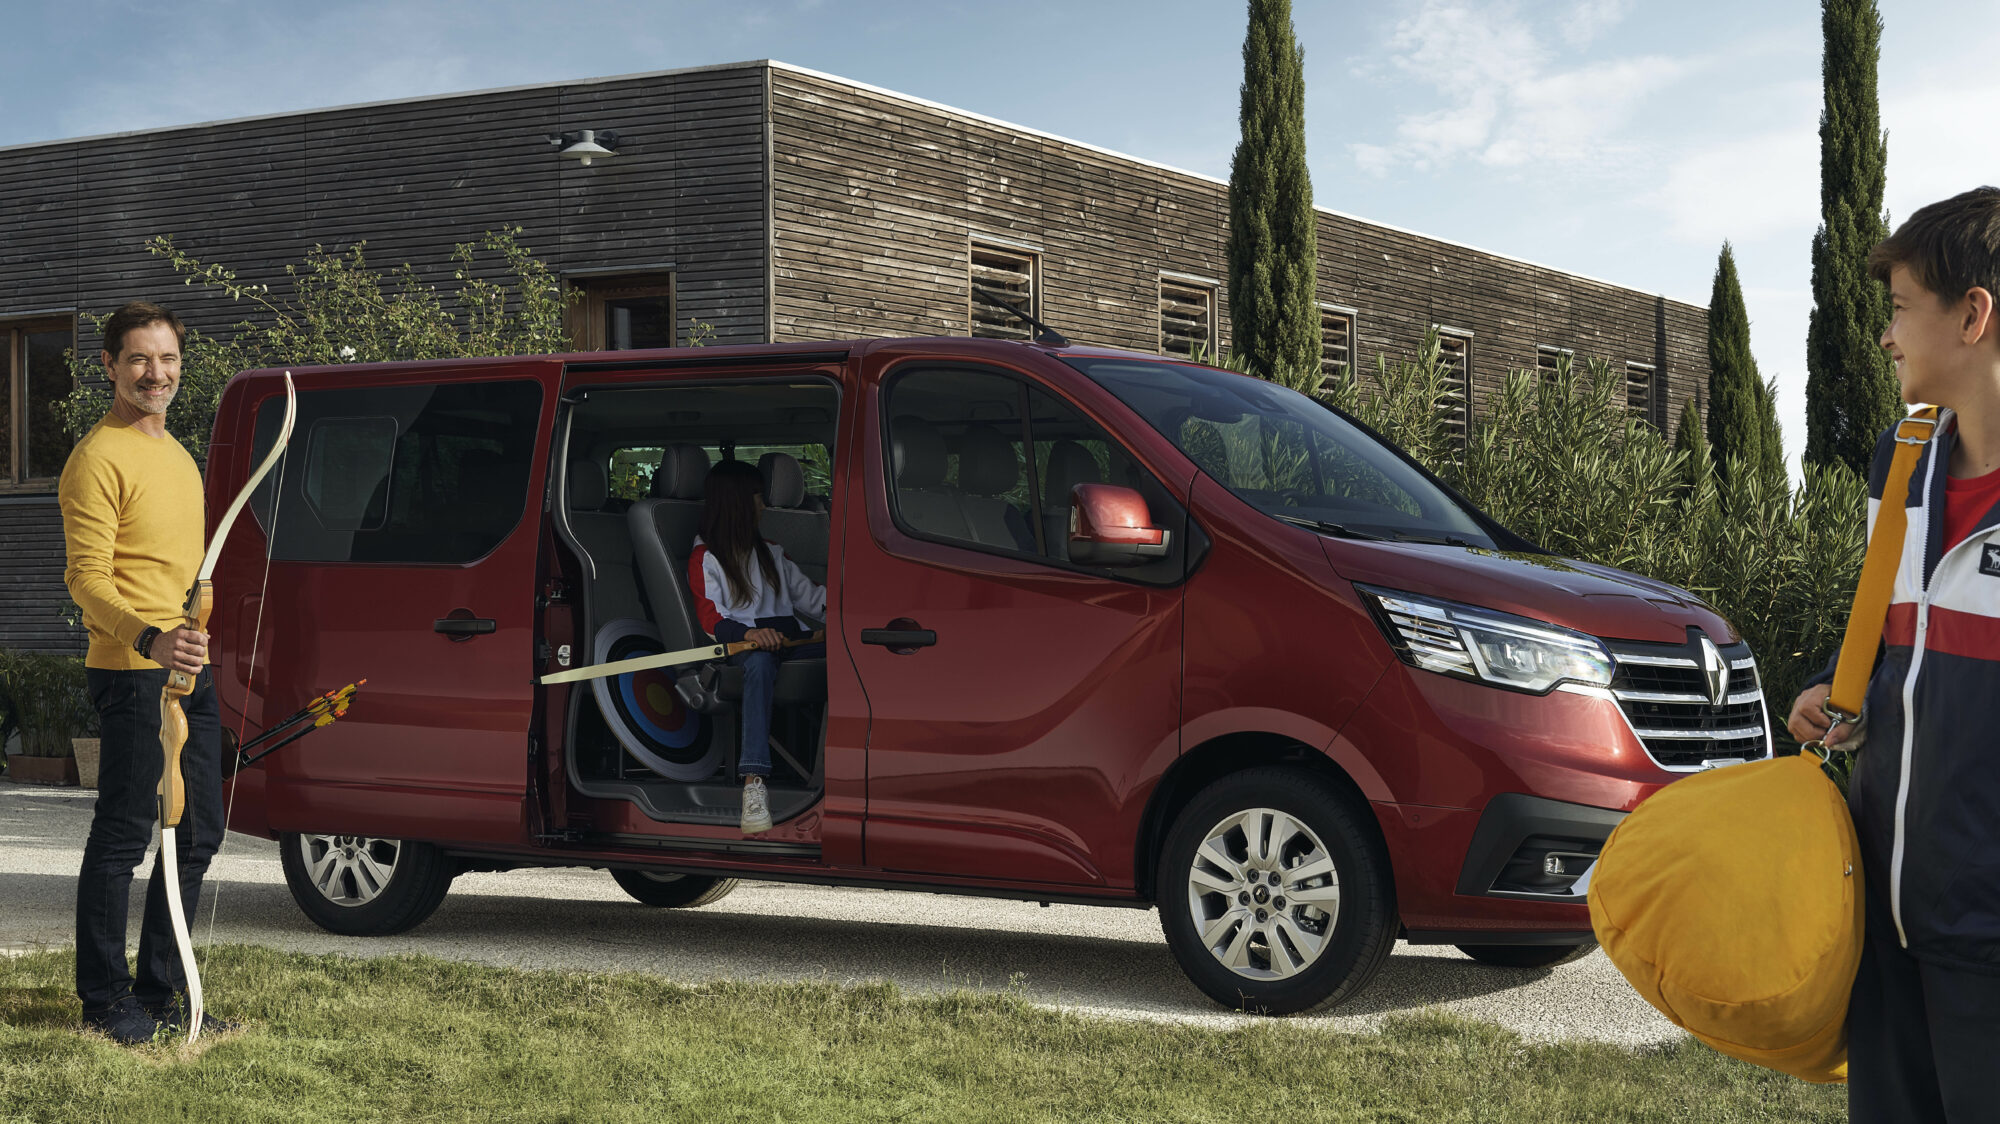 2021 - New Renault Trafic on location